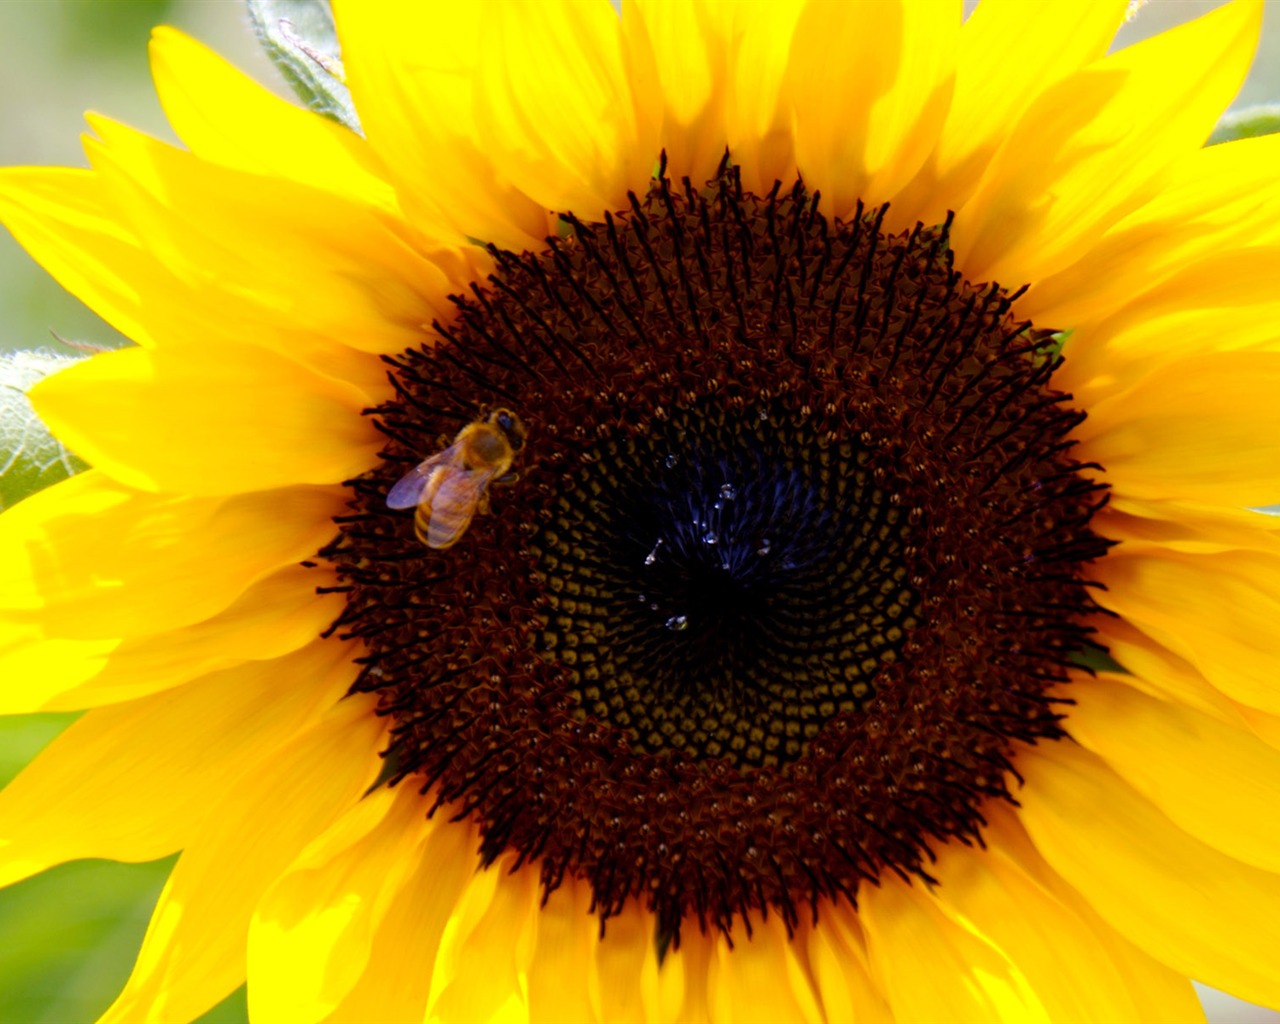 Sunny sunflower photo HD Wallpapers #24 - 1280x1024